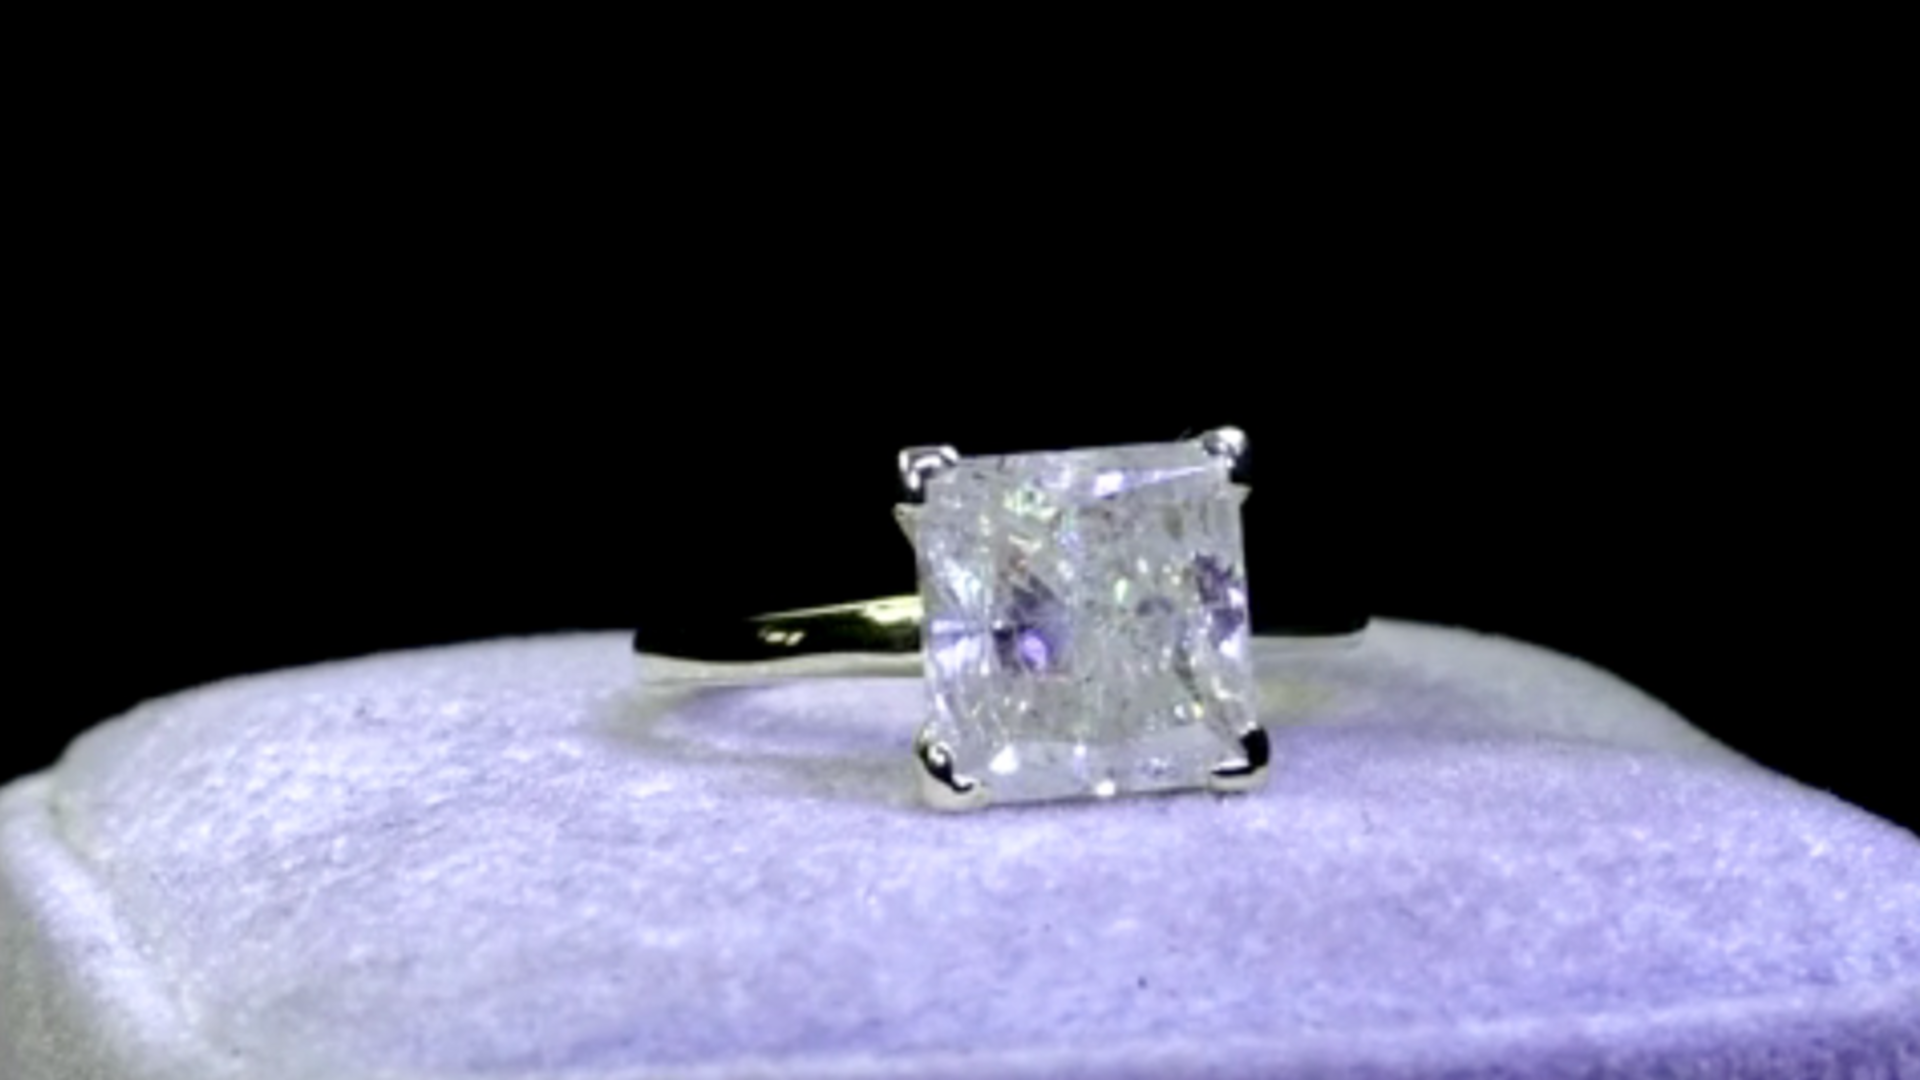 IMPRESSIVE 4.5ct PRINCESS CUT DIAMOND SOLITAIRE RING SET IN YELLOW METAL TESTED AS 14ct GOLD